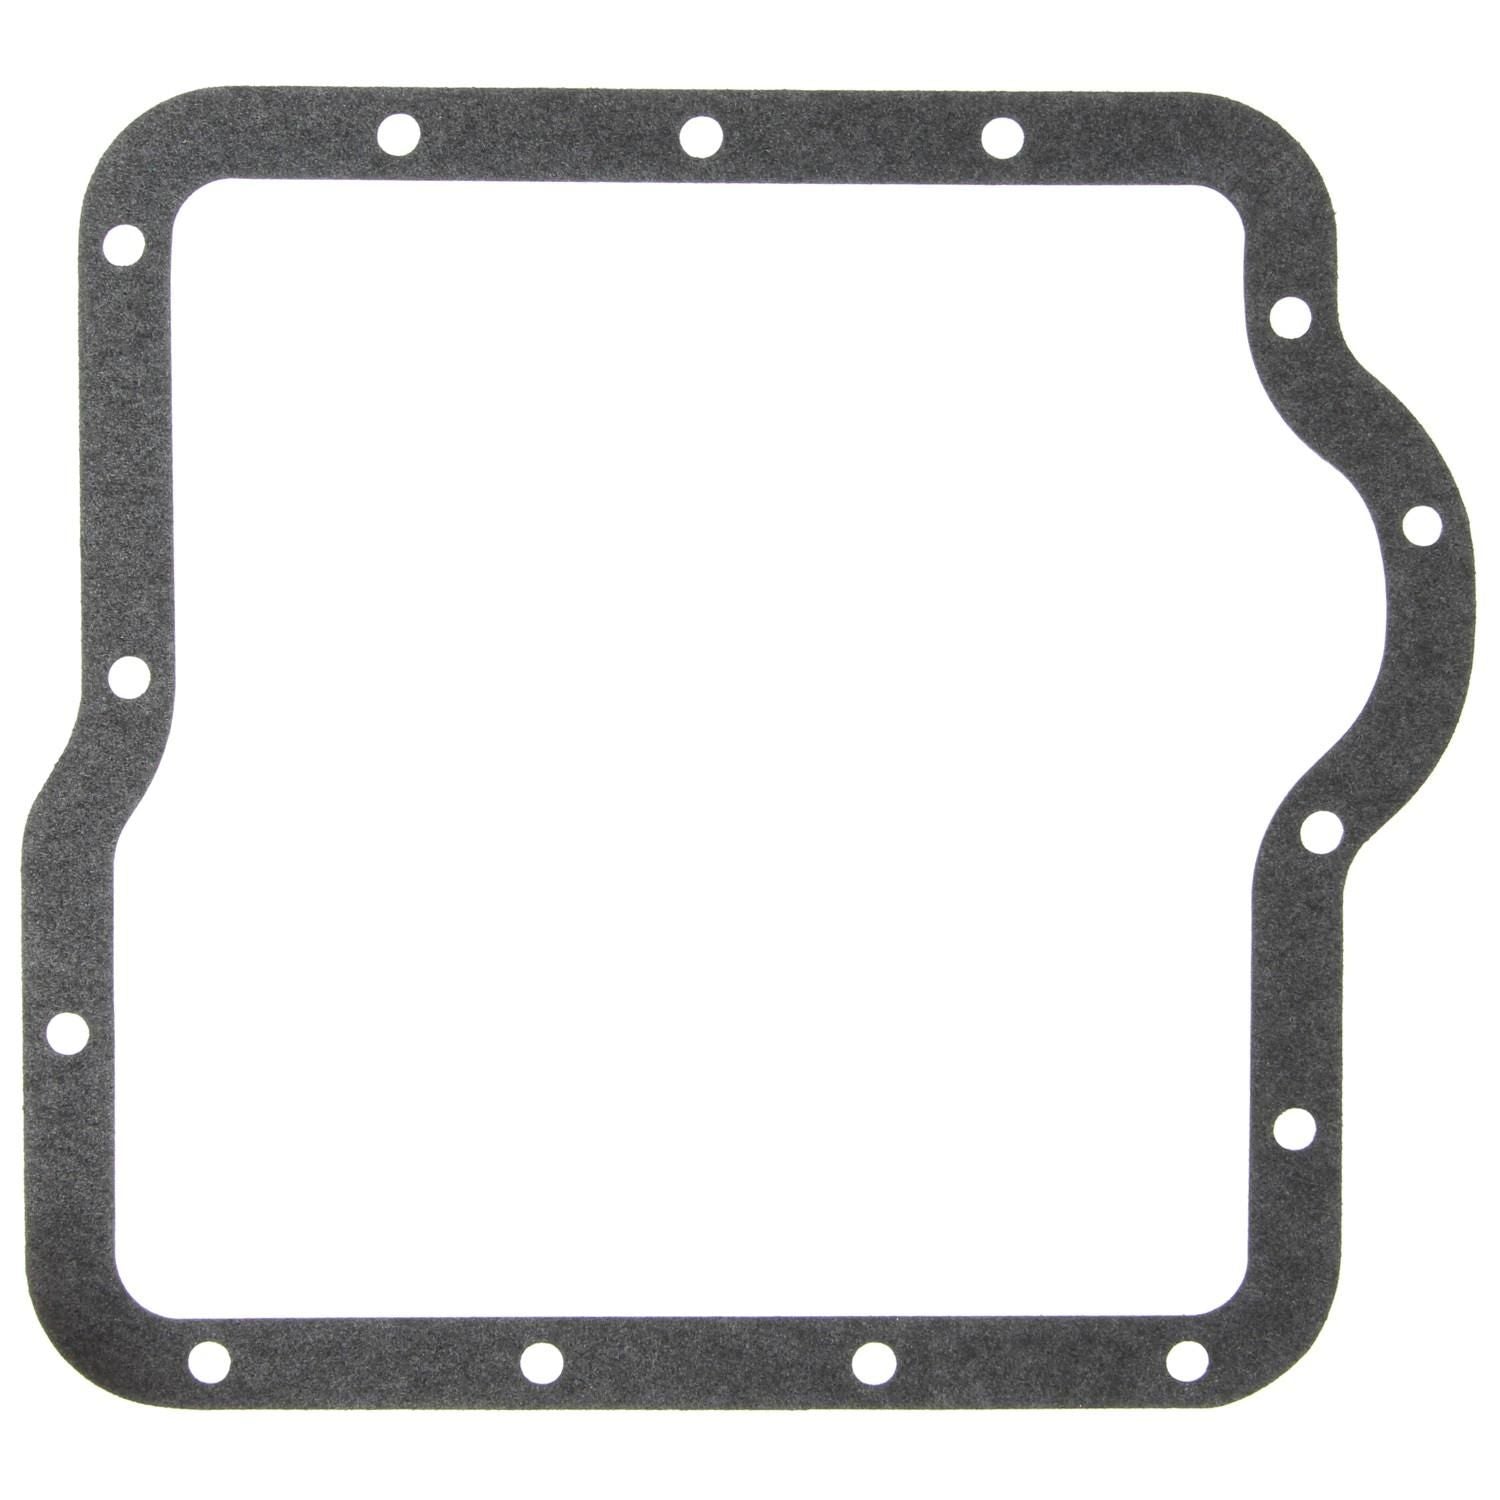 MAHLE Automatic Transmission Oil Pan Gasket W33185